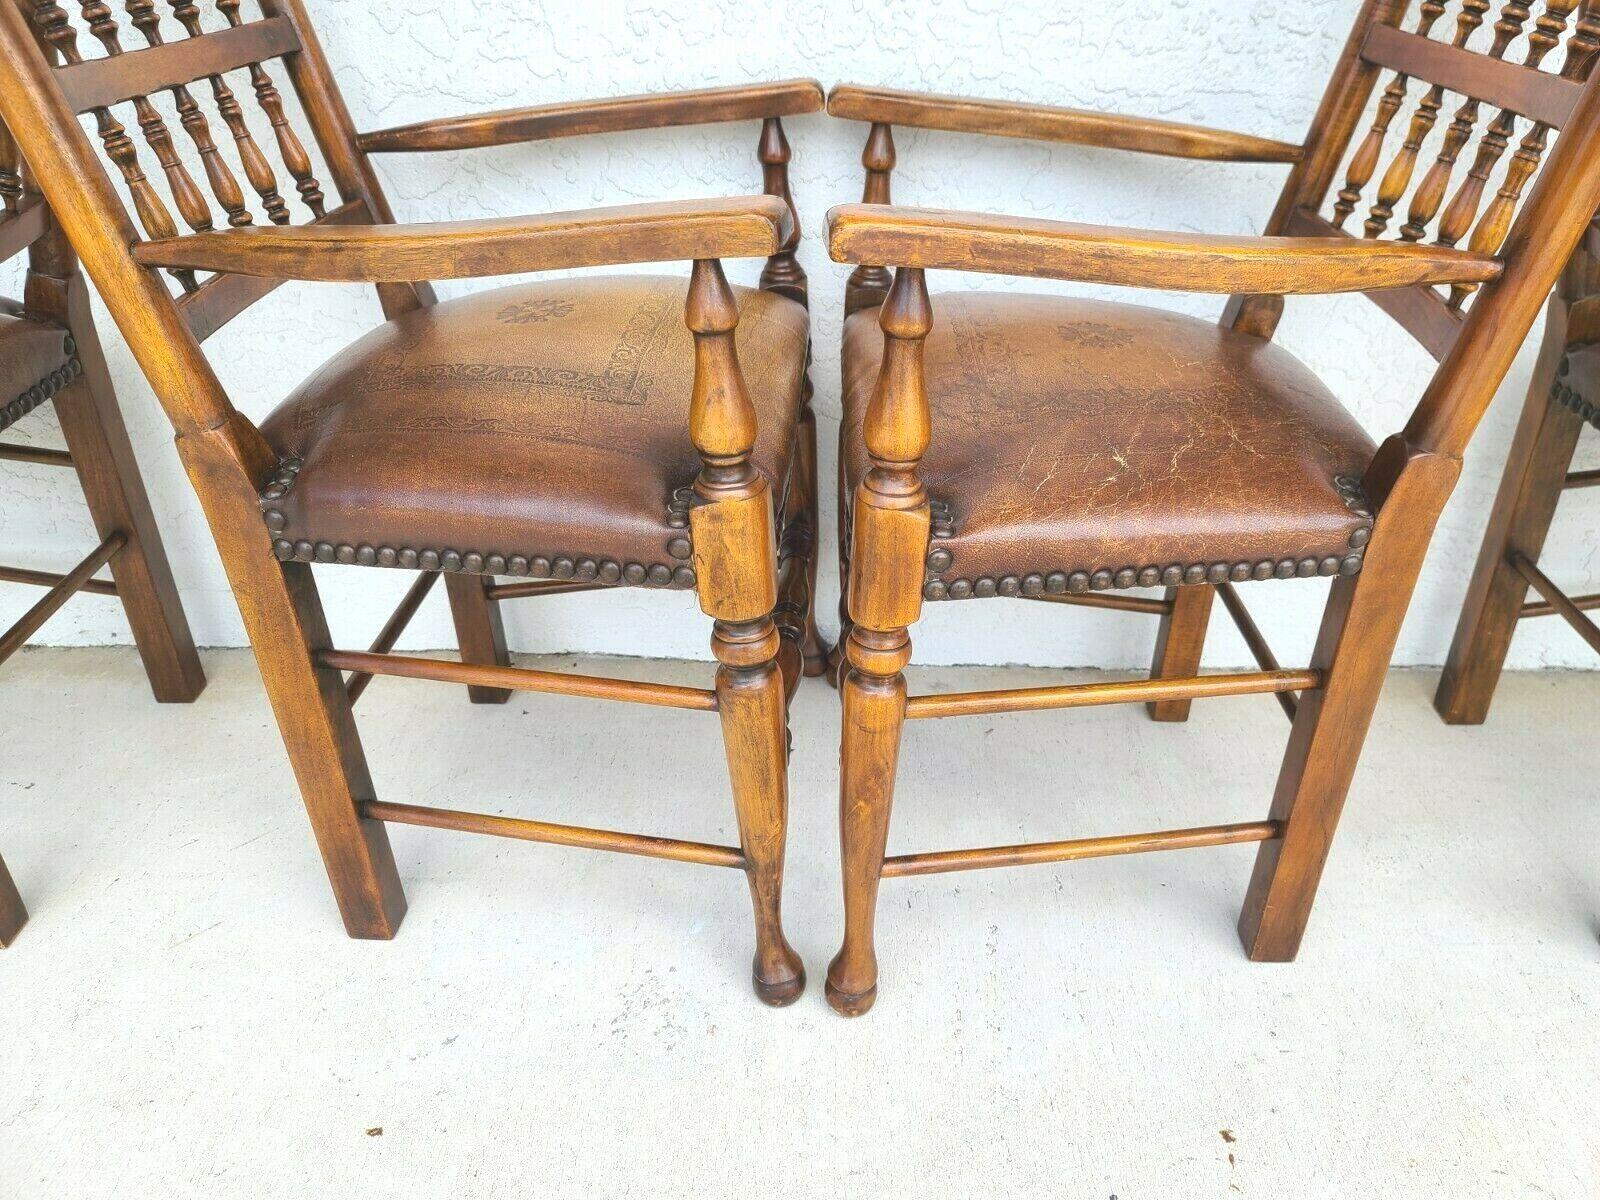 For FULL item description click on CONTINUE READING at the bottom of this page. 
Offering One Of Our Recent Palm Beach Estate Fine Furniture Acquisitions Of A 
Set of (4) Lancashire Style Dining Chairs by THEODORE ALEXANDER Spindle Back Solid Wood